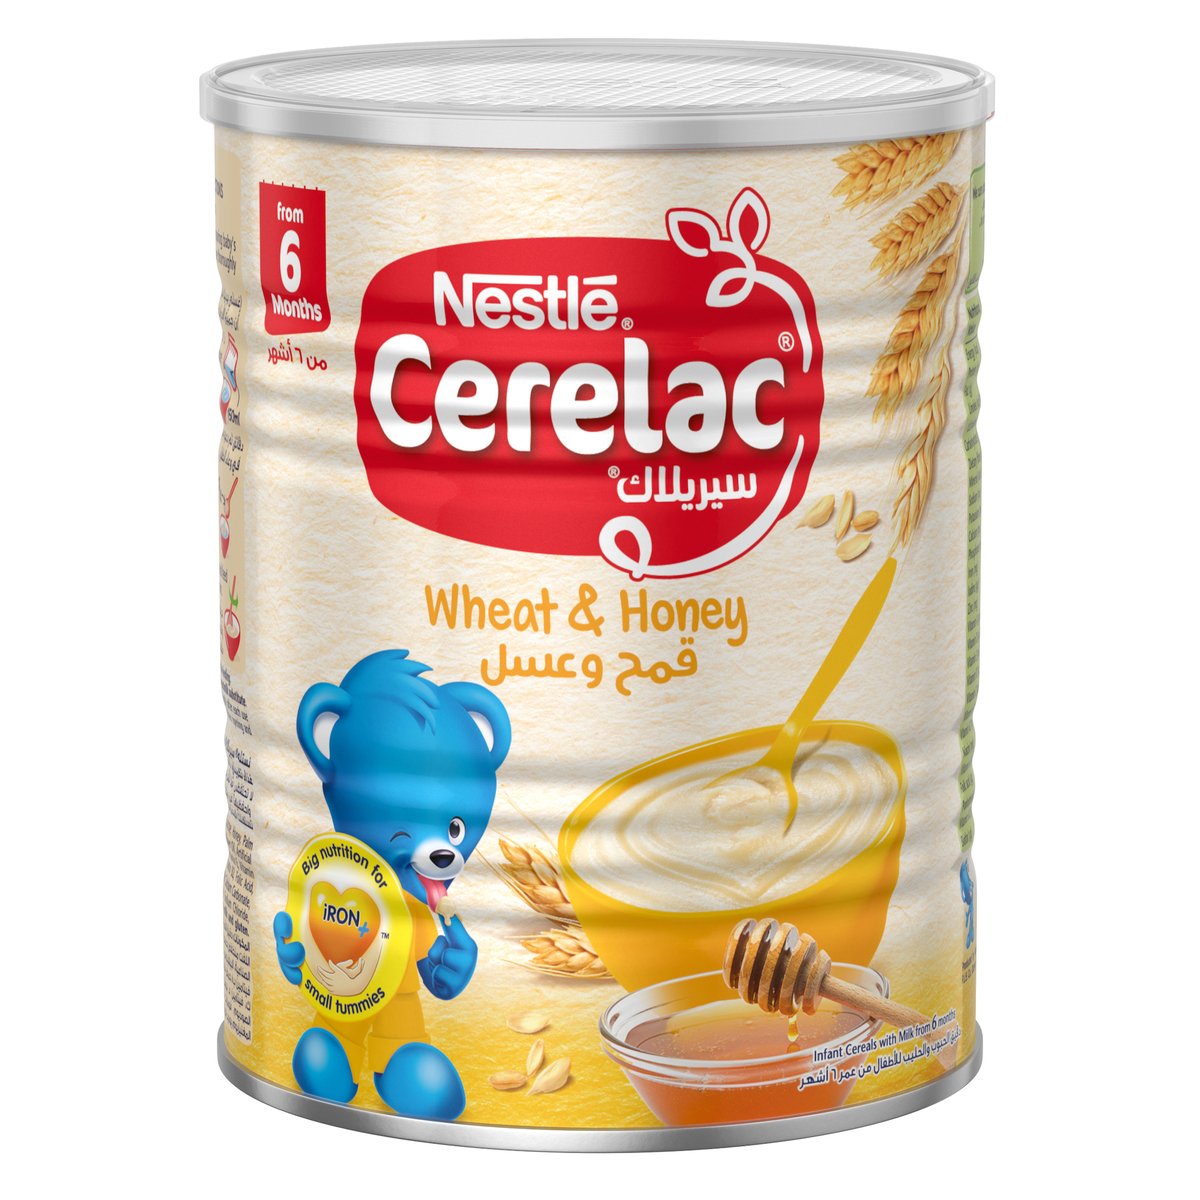 Nestle Cerelac Infant Cereals With Iron + Wheat & Honey From 6 Months 400g